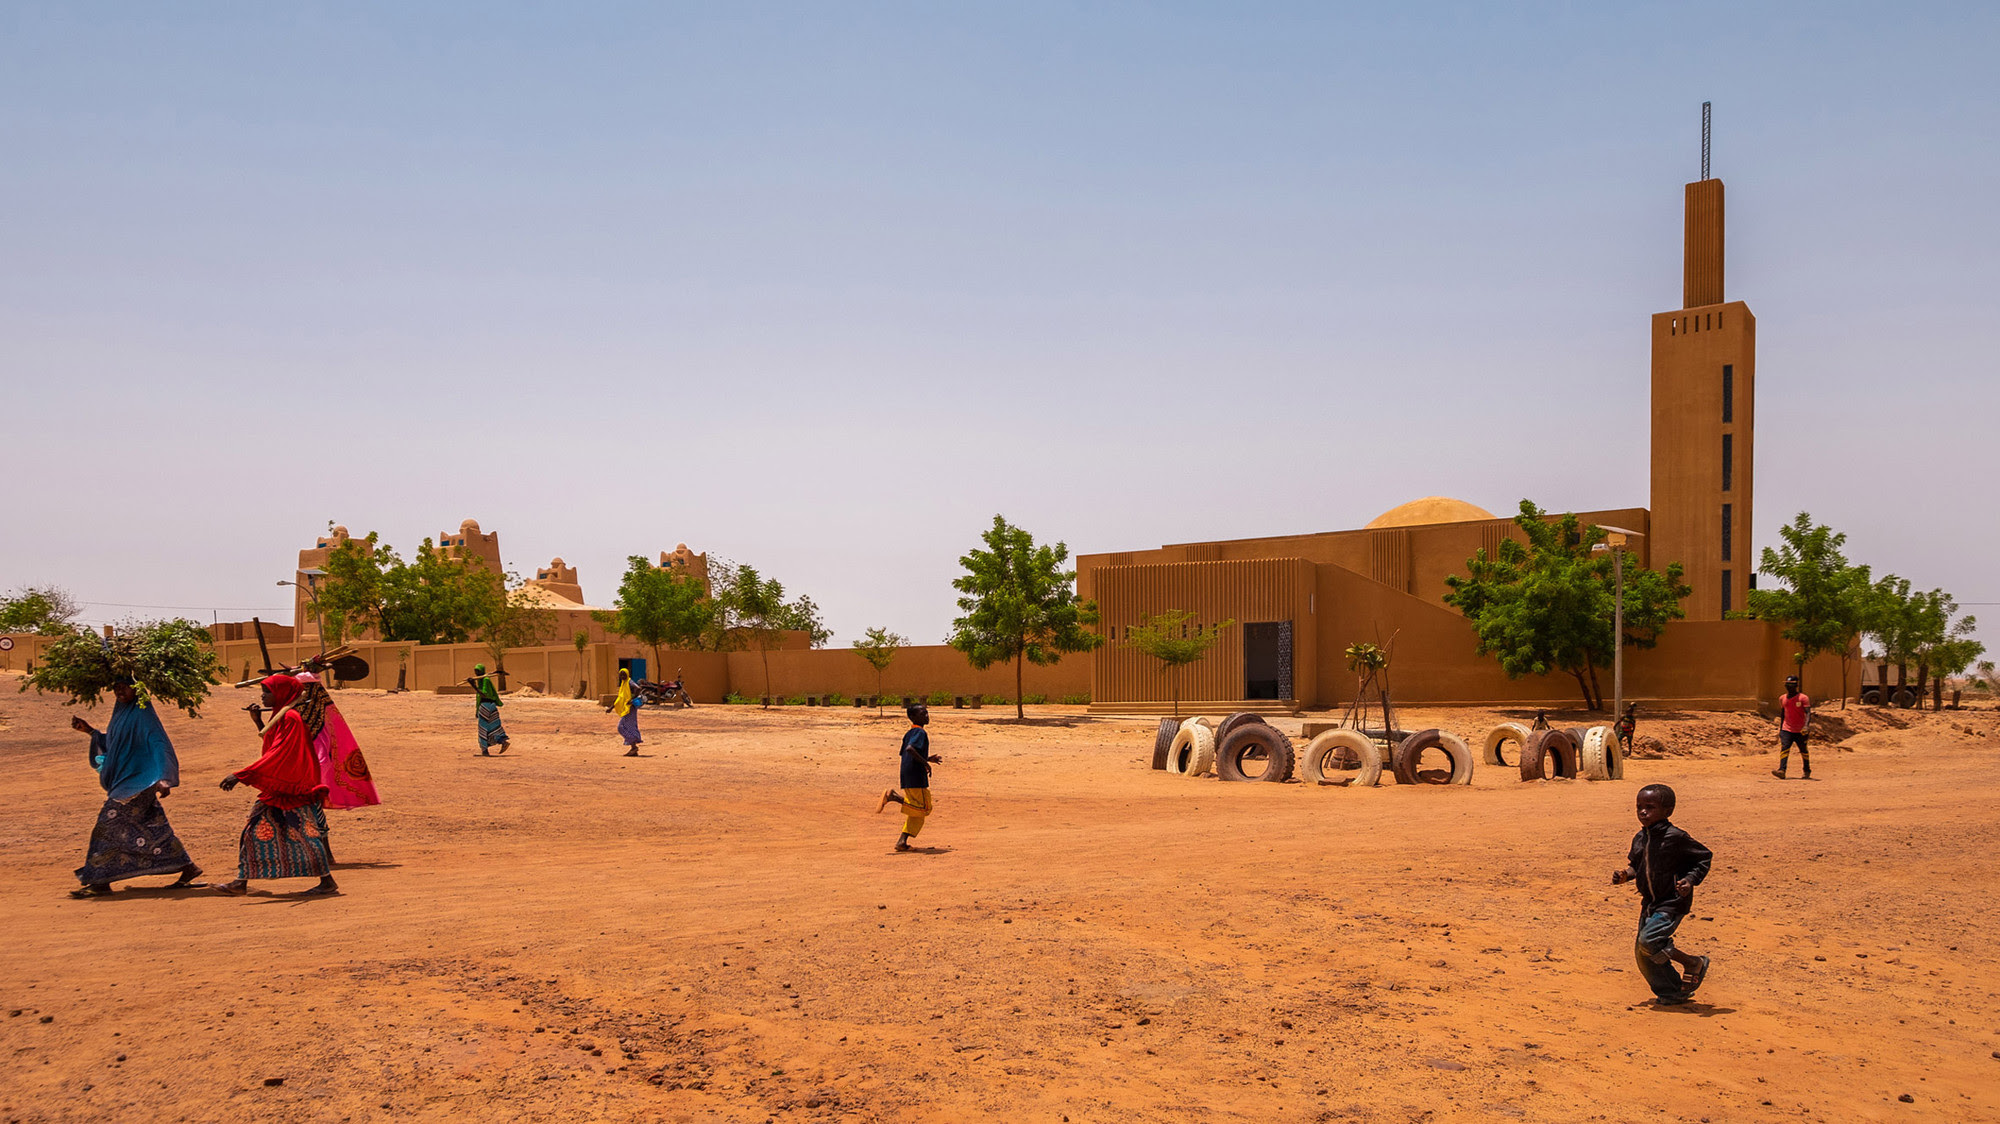 Photo of a library and community center in Niger